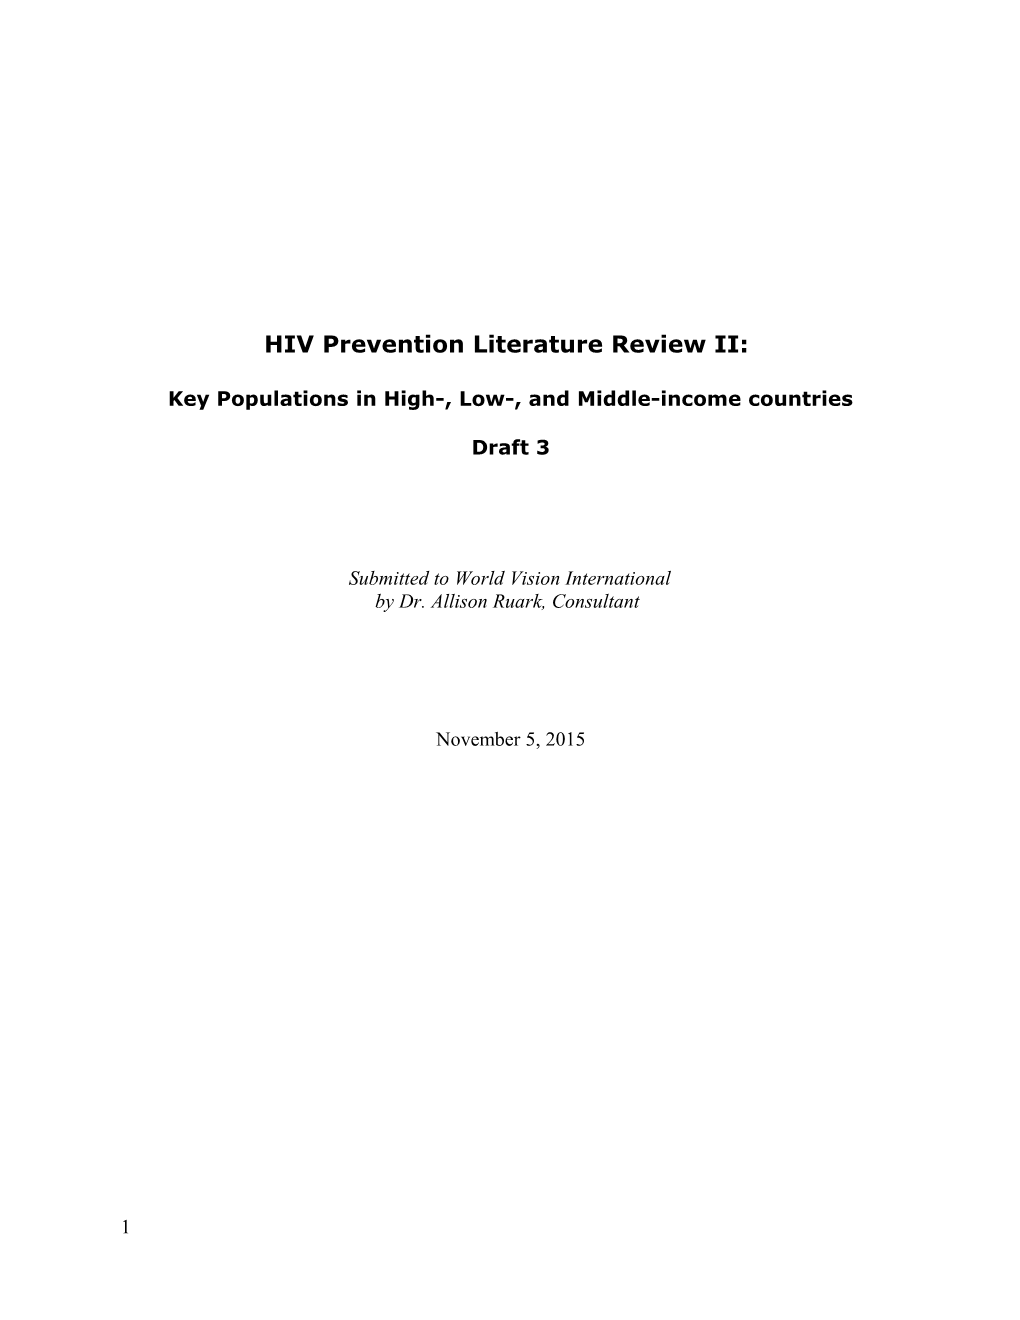 HIV Prevention Literature Review II: Key Populations in High-, Low-, and Middle-Income Countries